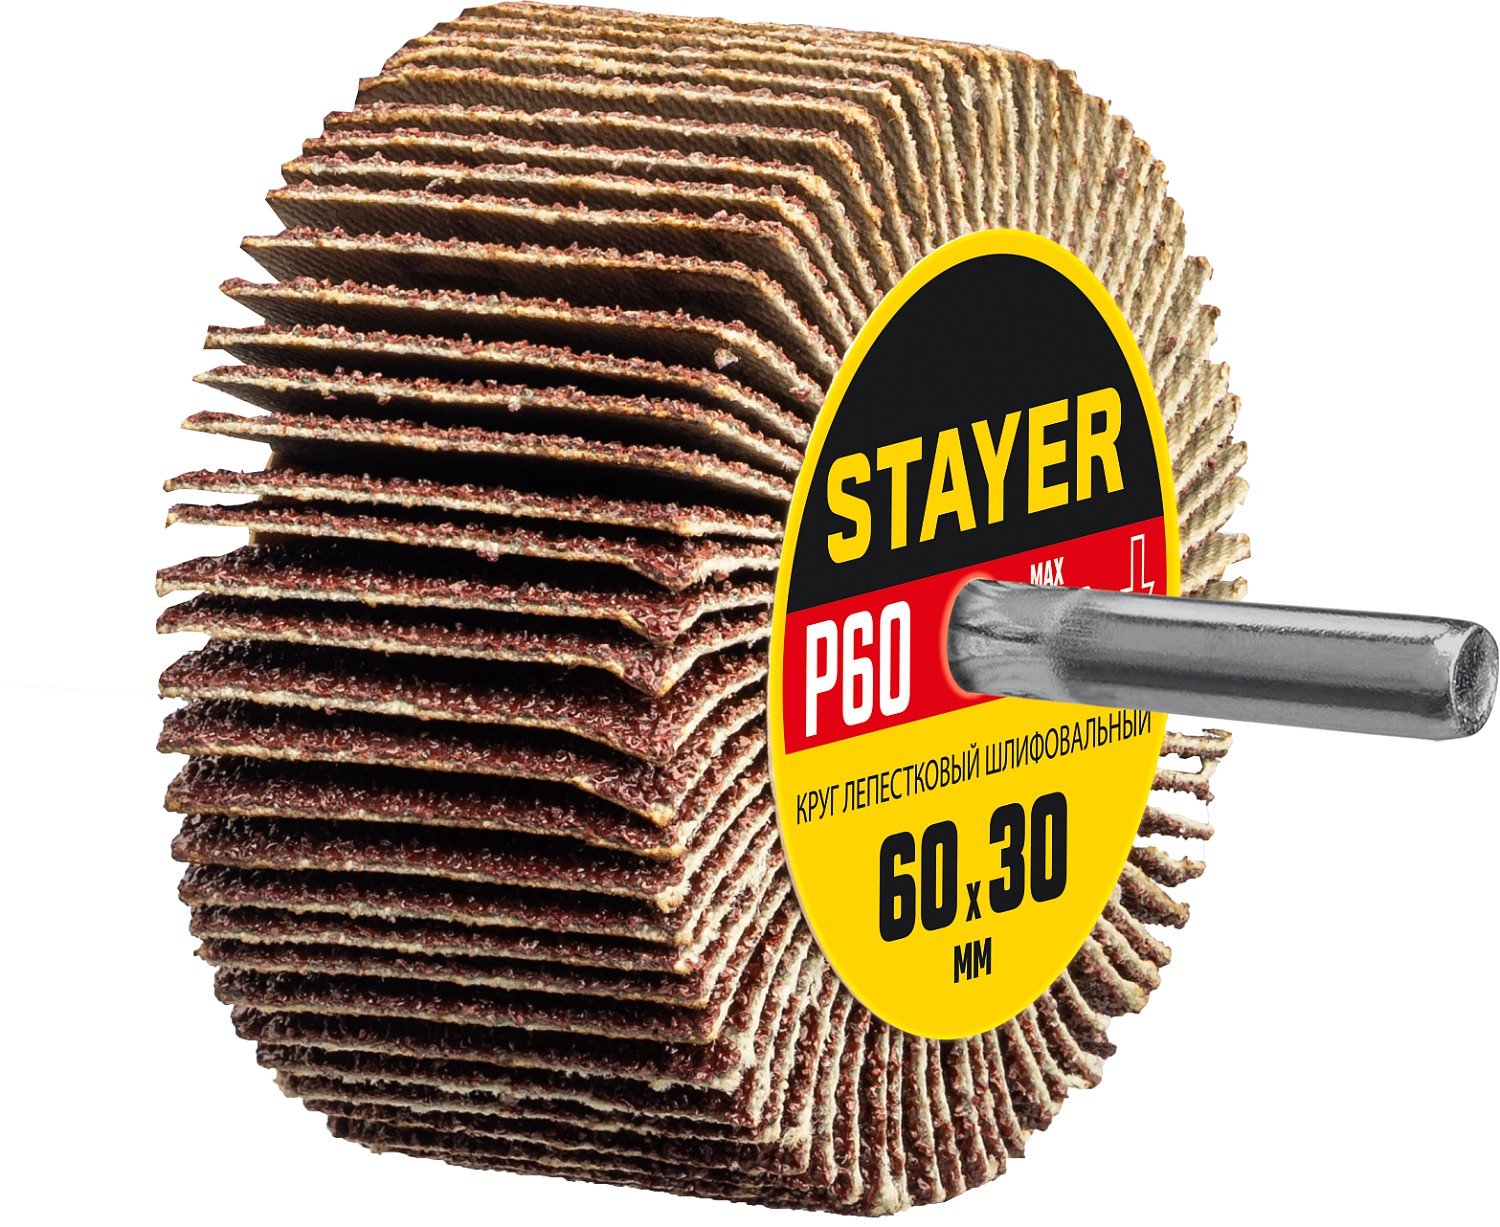 STAYER d 60x30 , P60,   ,  , (36608-060)